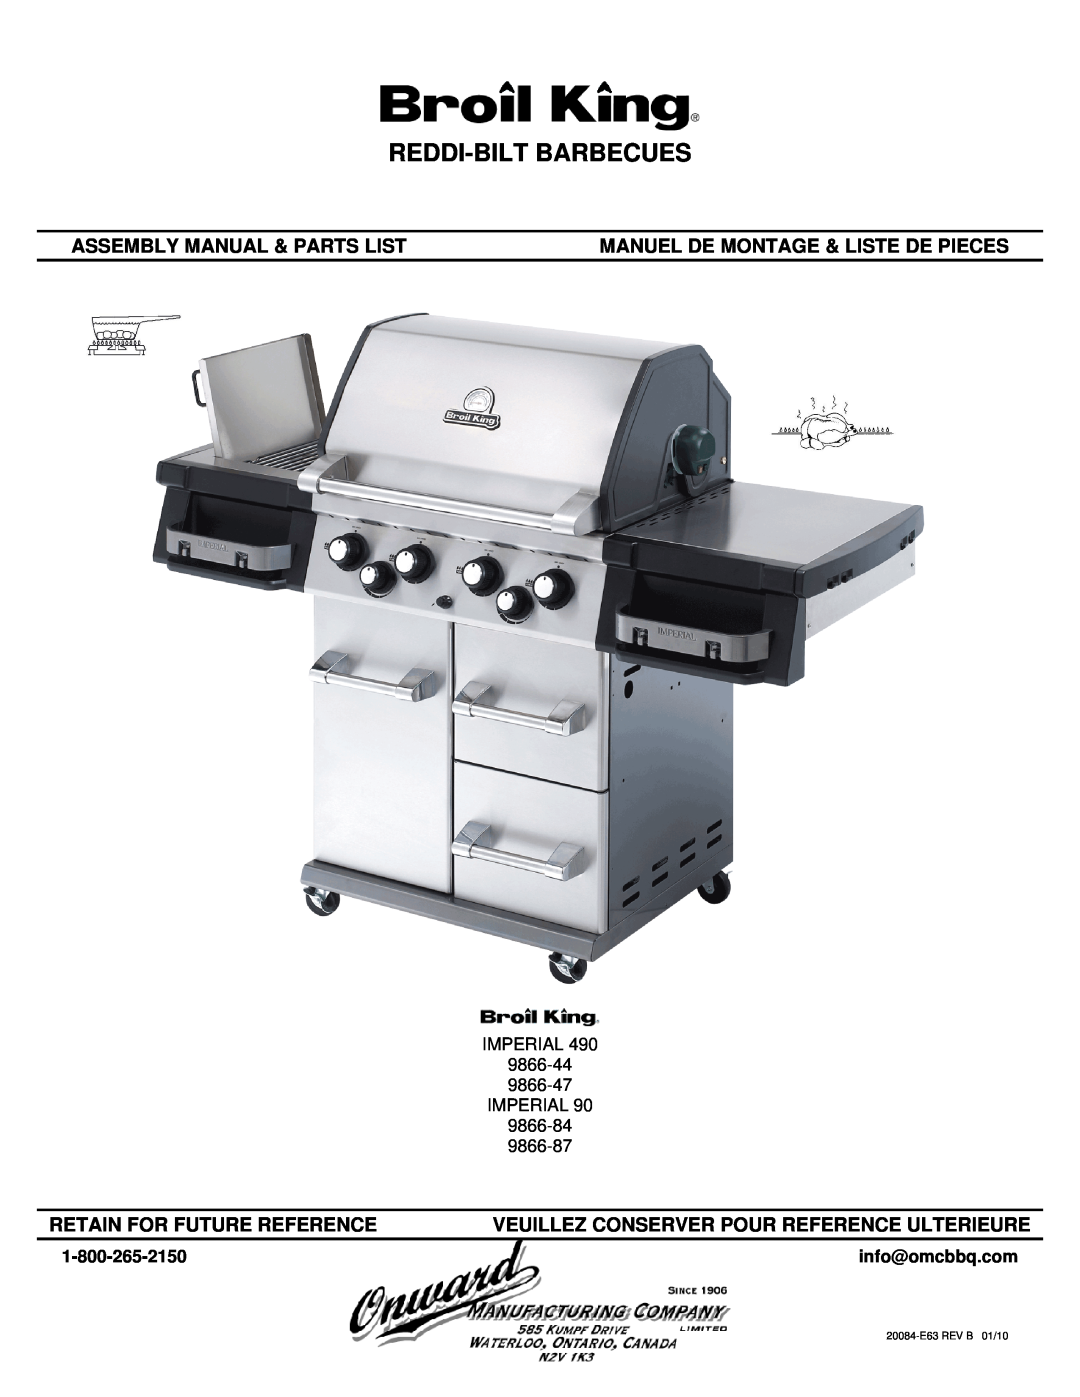 Broil King 9866-44 manual info@omcbbq.com, Reddi-Bilt Barbecues, Assembly Manual & Parts List, Retain For Future Reference 